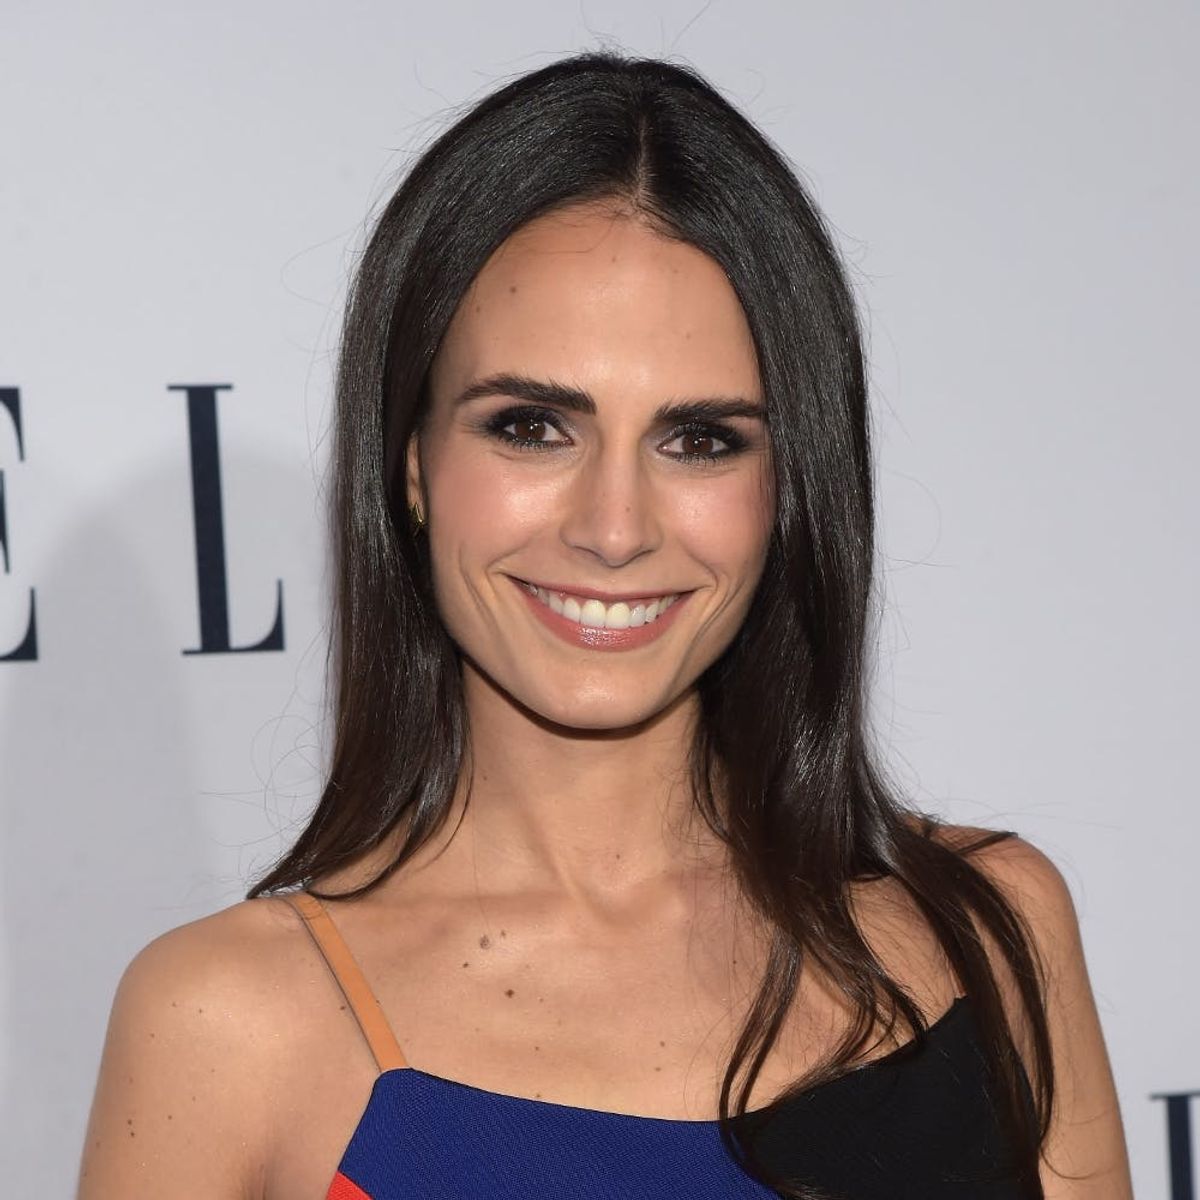 Fast and Furious’ Jordana Brewster Welcomes a Baby Boy Via Surrogate